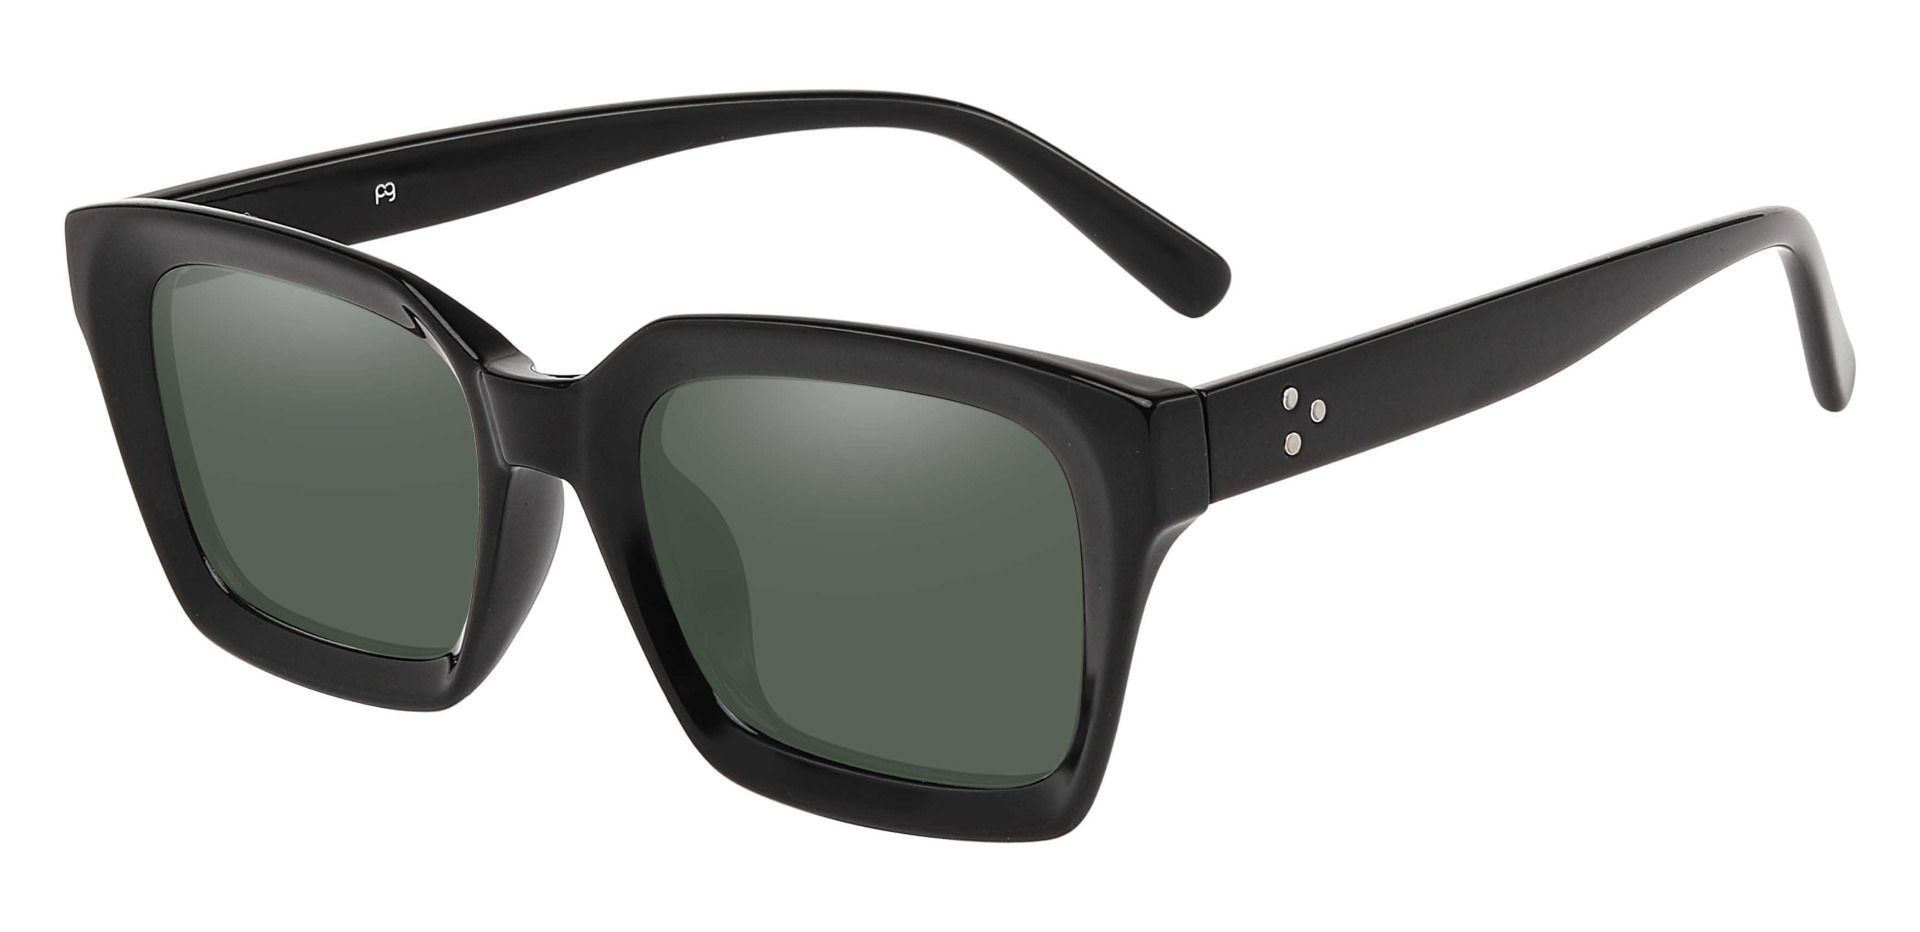 Unity Rectangle Lined Bifocal Sunglasses - Black Frame With Green Lenses